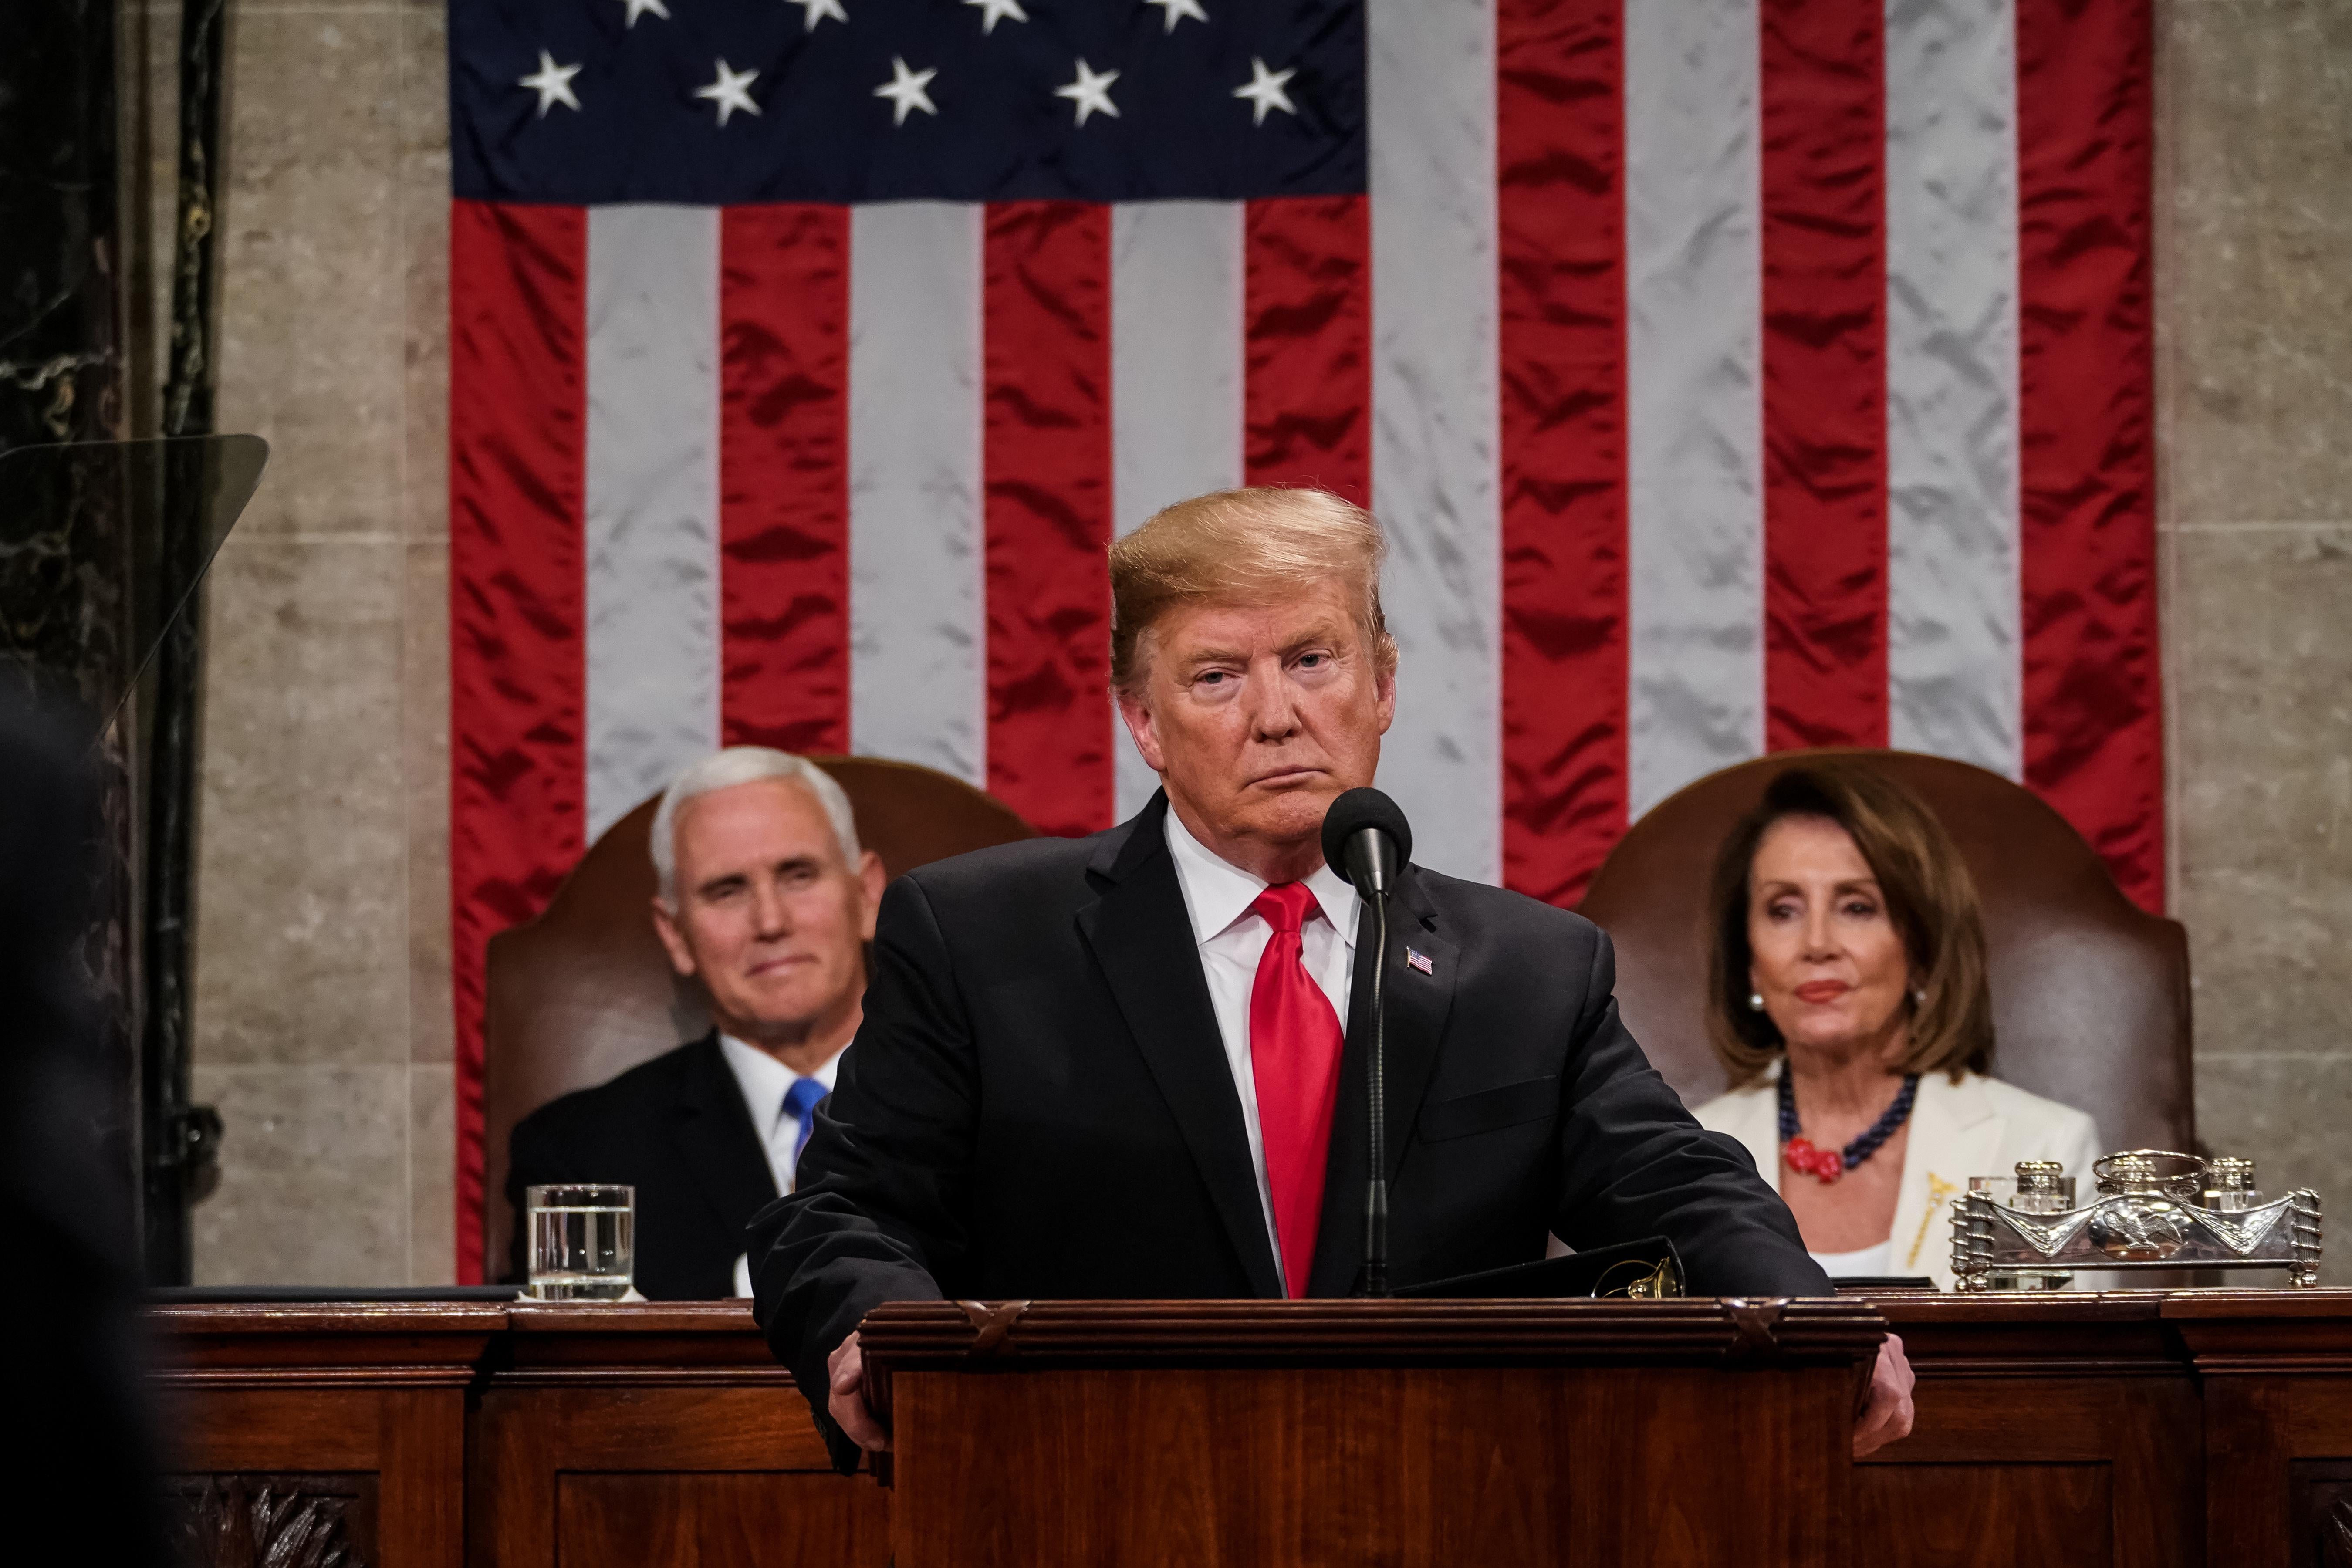 U.S. President Donald Trump, with Vice President Mike Pence and House Speaker Nancy Pelosi looking on, delivers the State of the Union address on Tuesday.